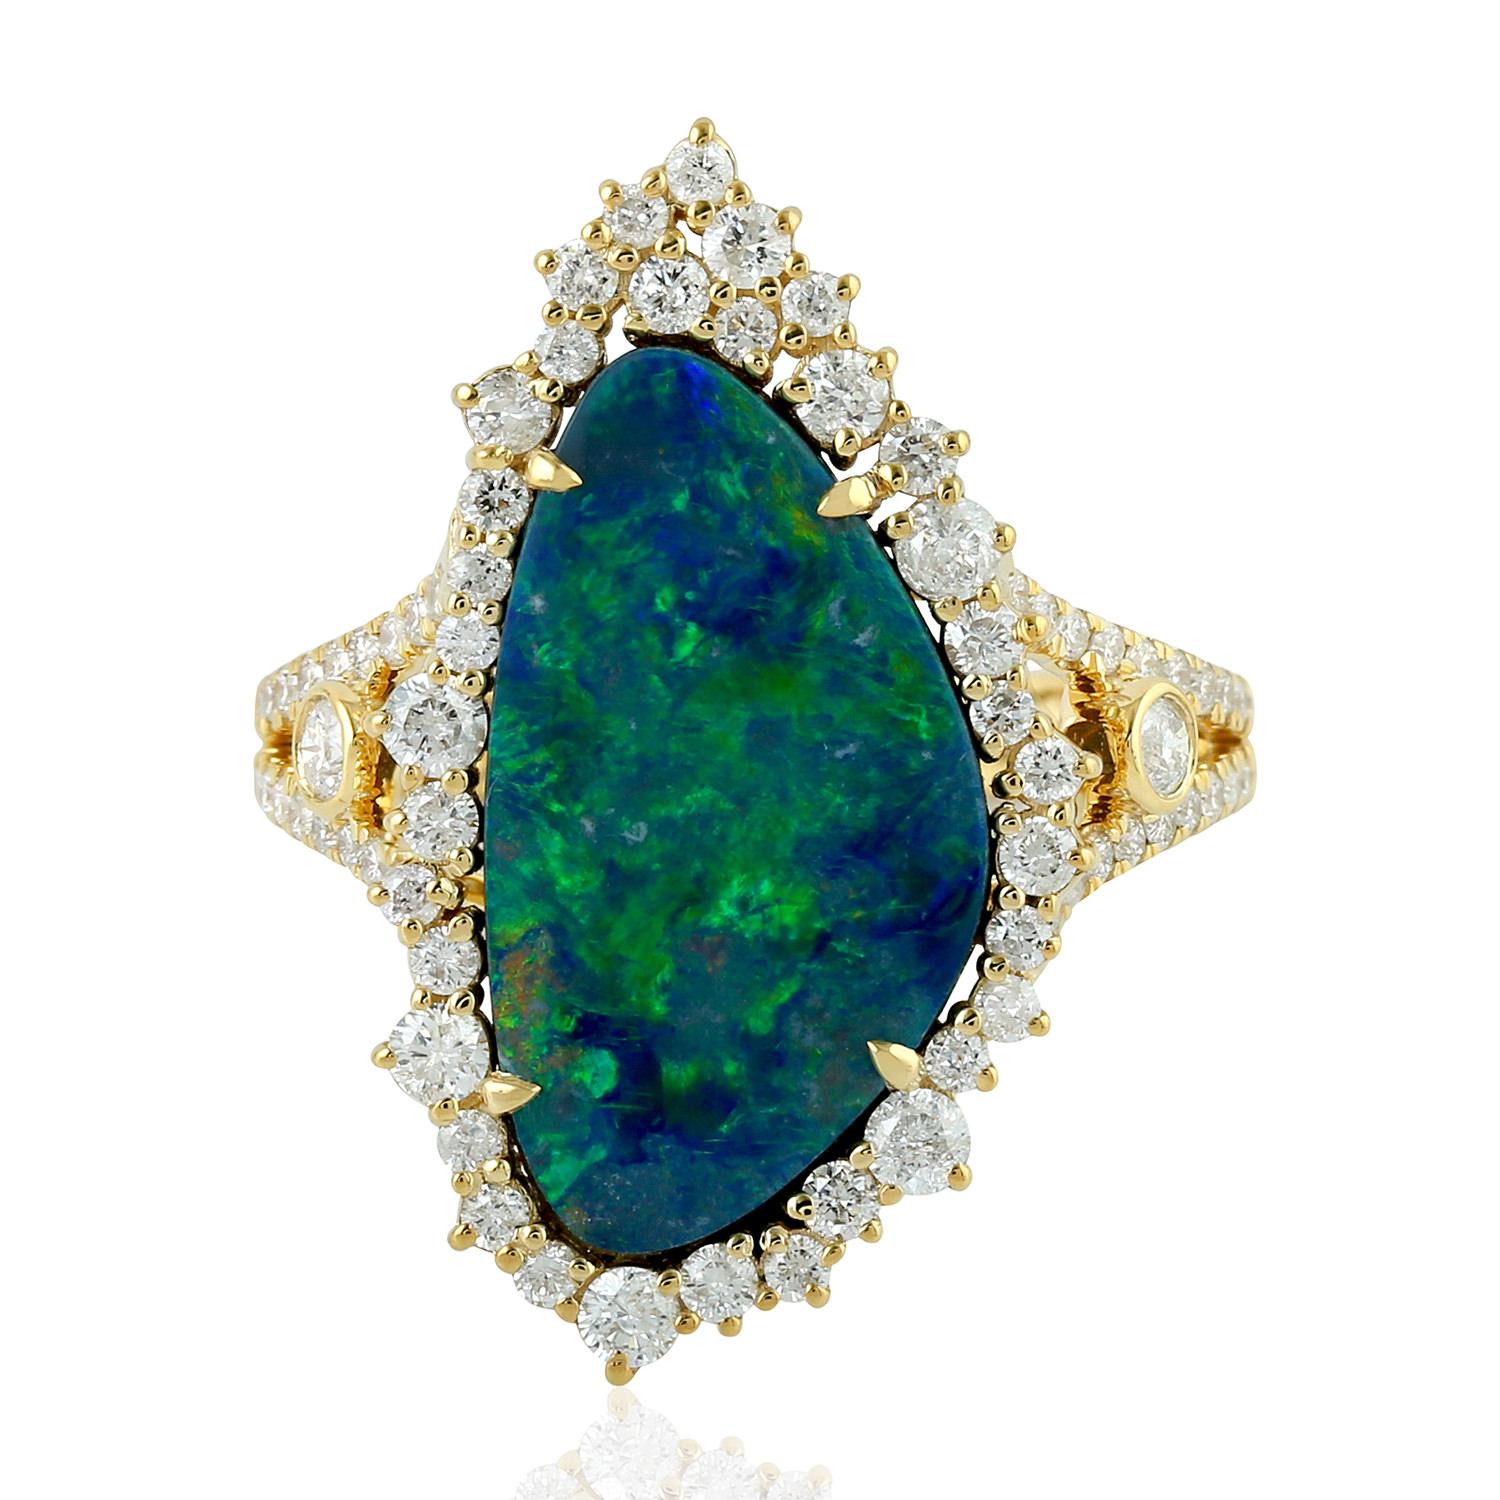 Mixed Cut Stunning Opal and Diamond Ring in 18k Yellow Gold